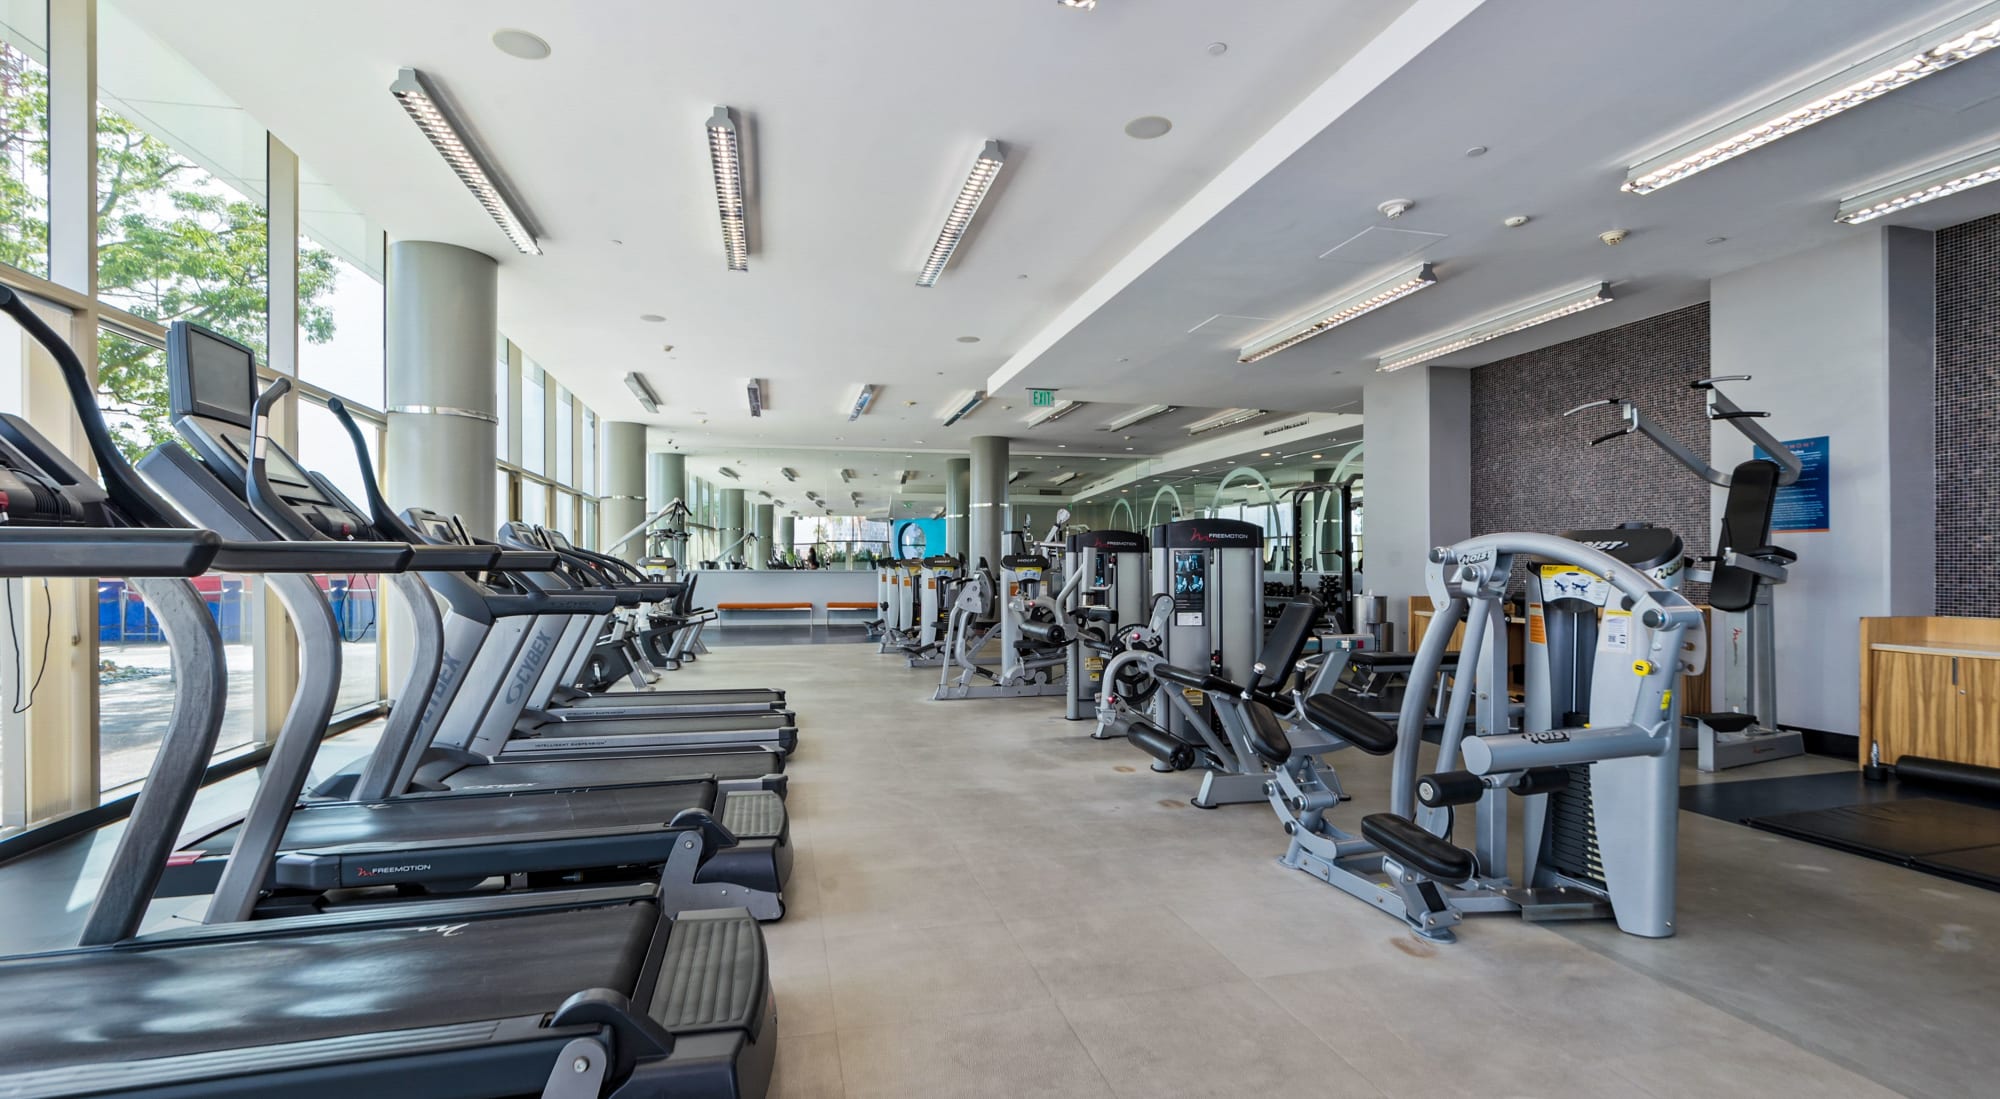 HarborFit fitness center at The Vermont in Los Angeles, California 